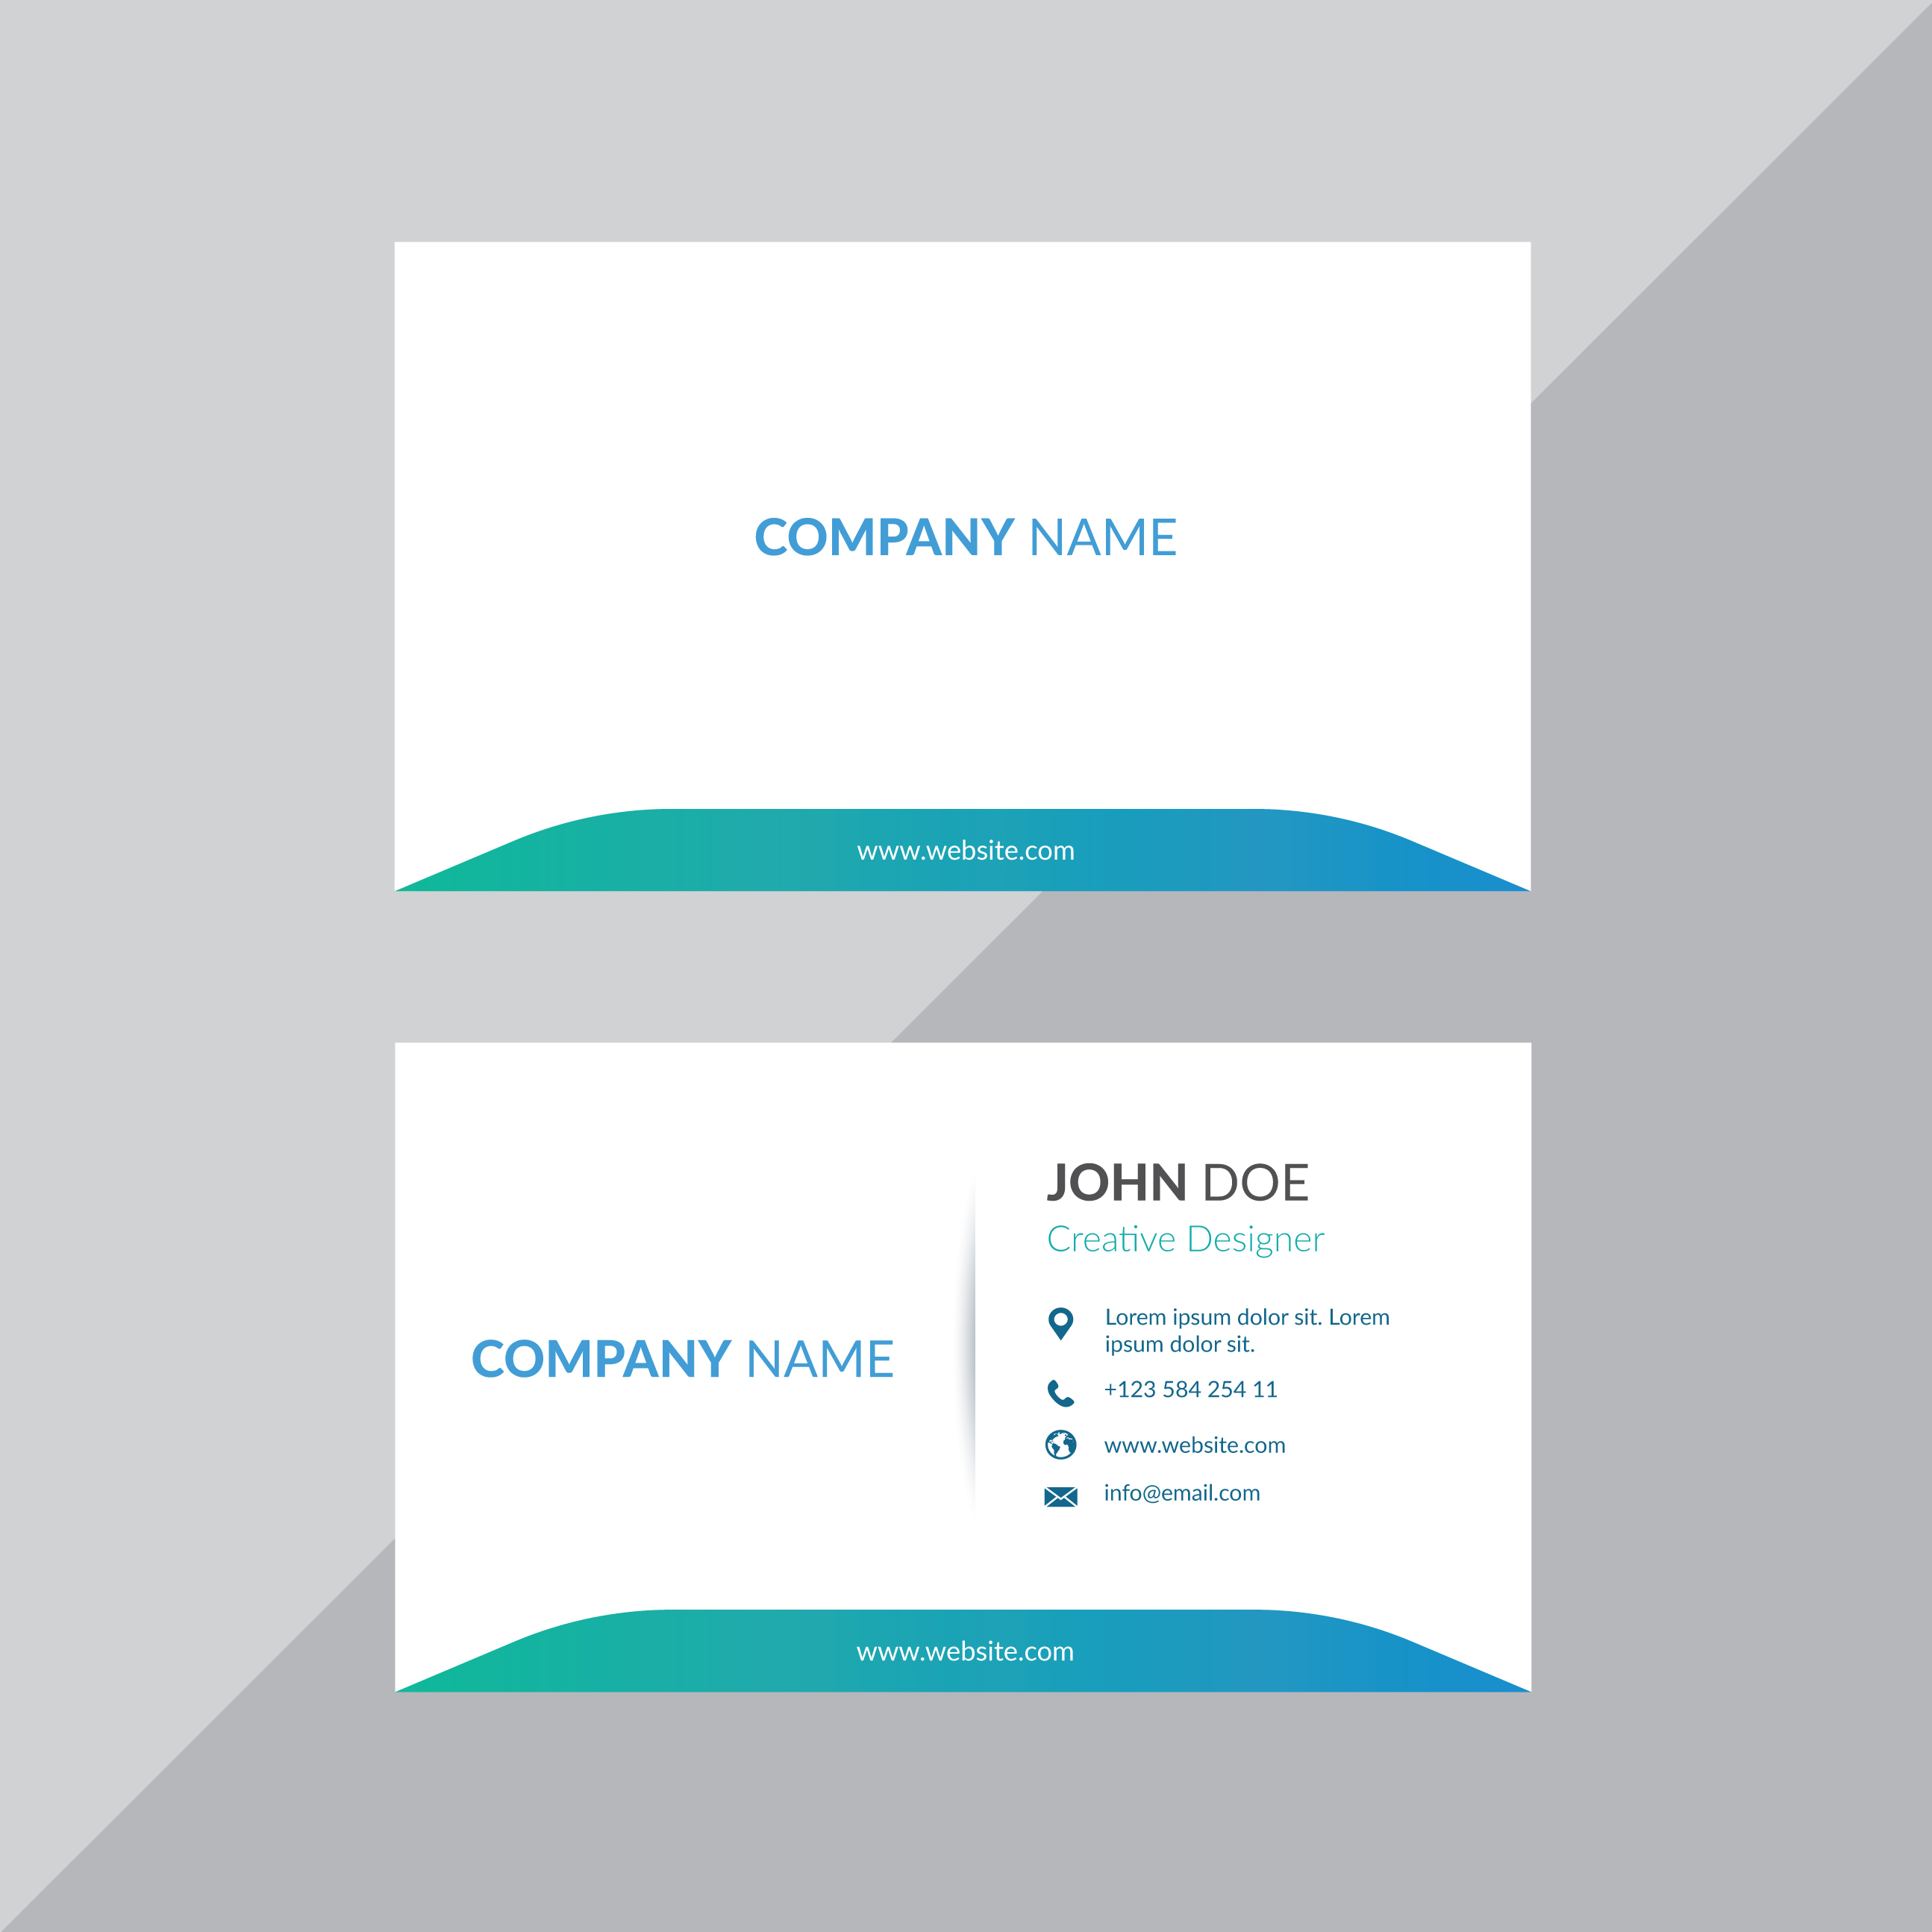 create-a-simple-business-card-design-in-24-hours-ubicaciondepersonas